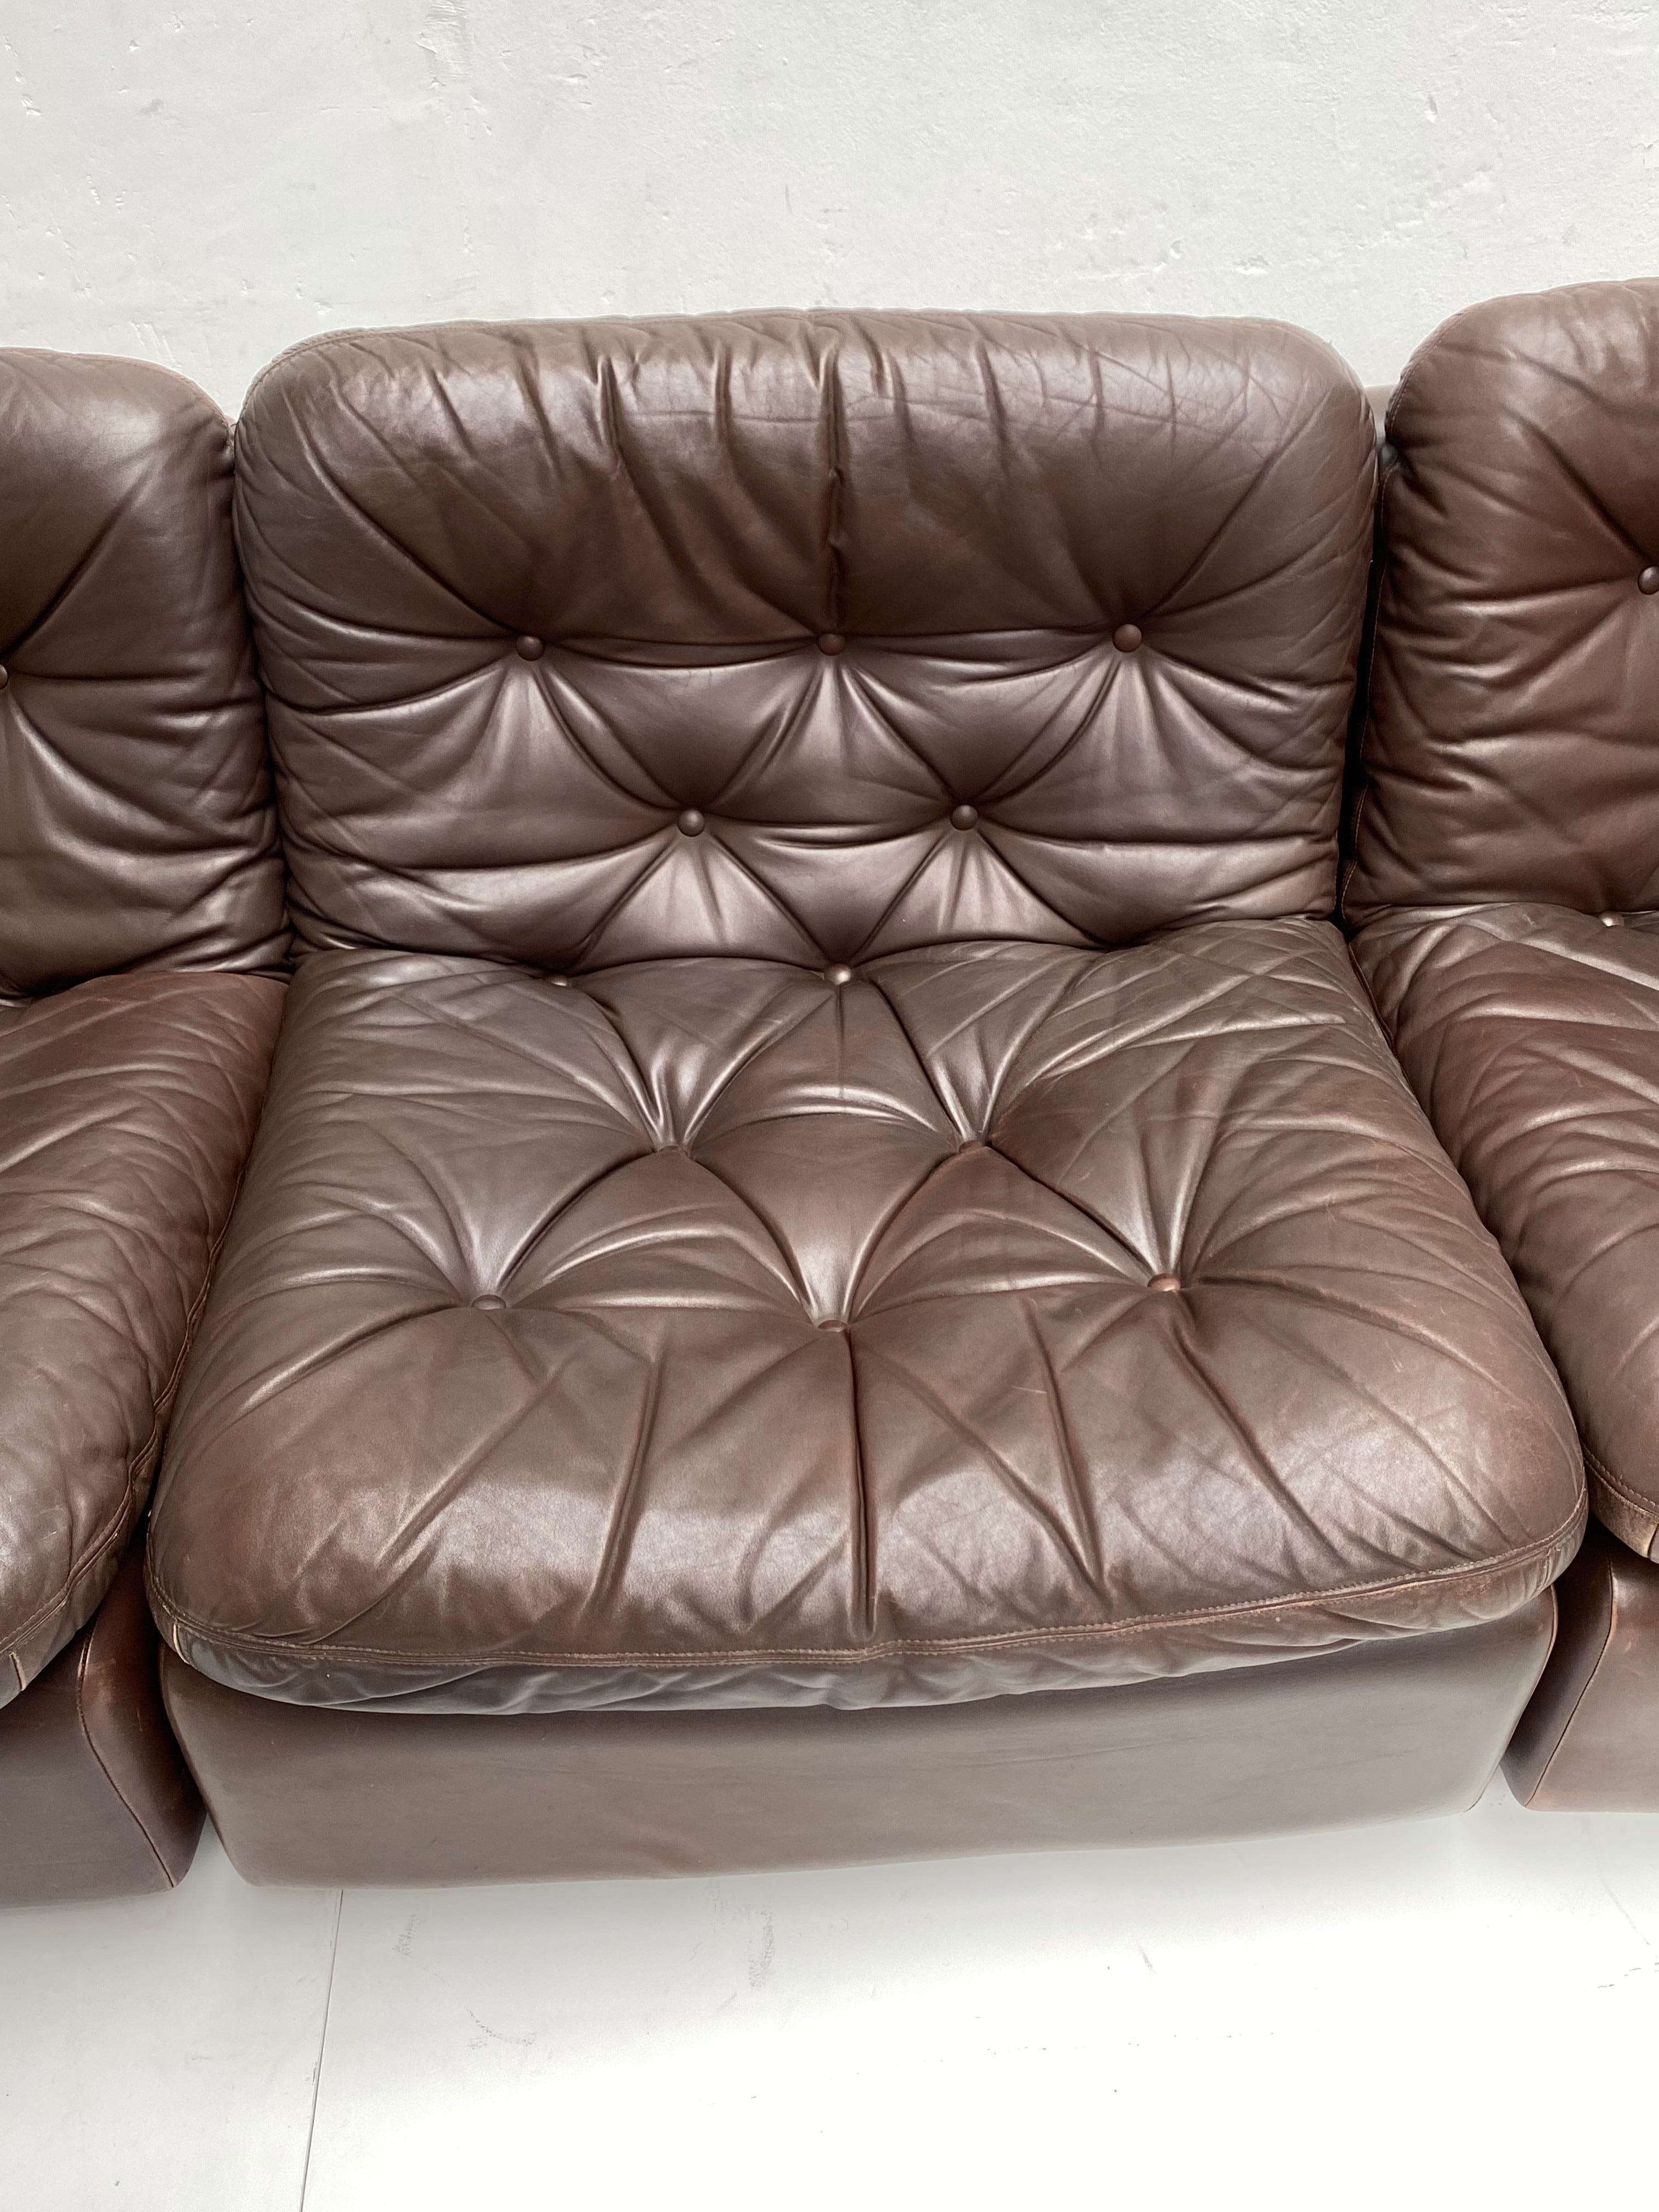 Chocolate Brown Leather 5-Piece Modular Seating System, COR Germany, 1970s 3